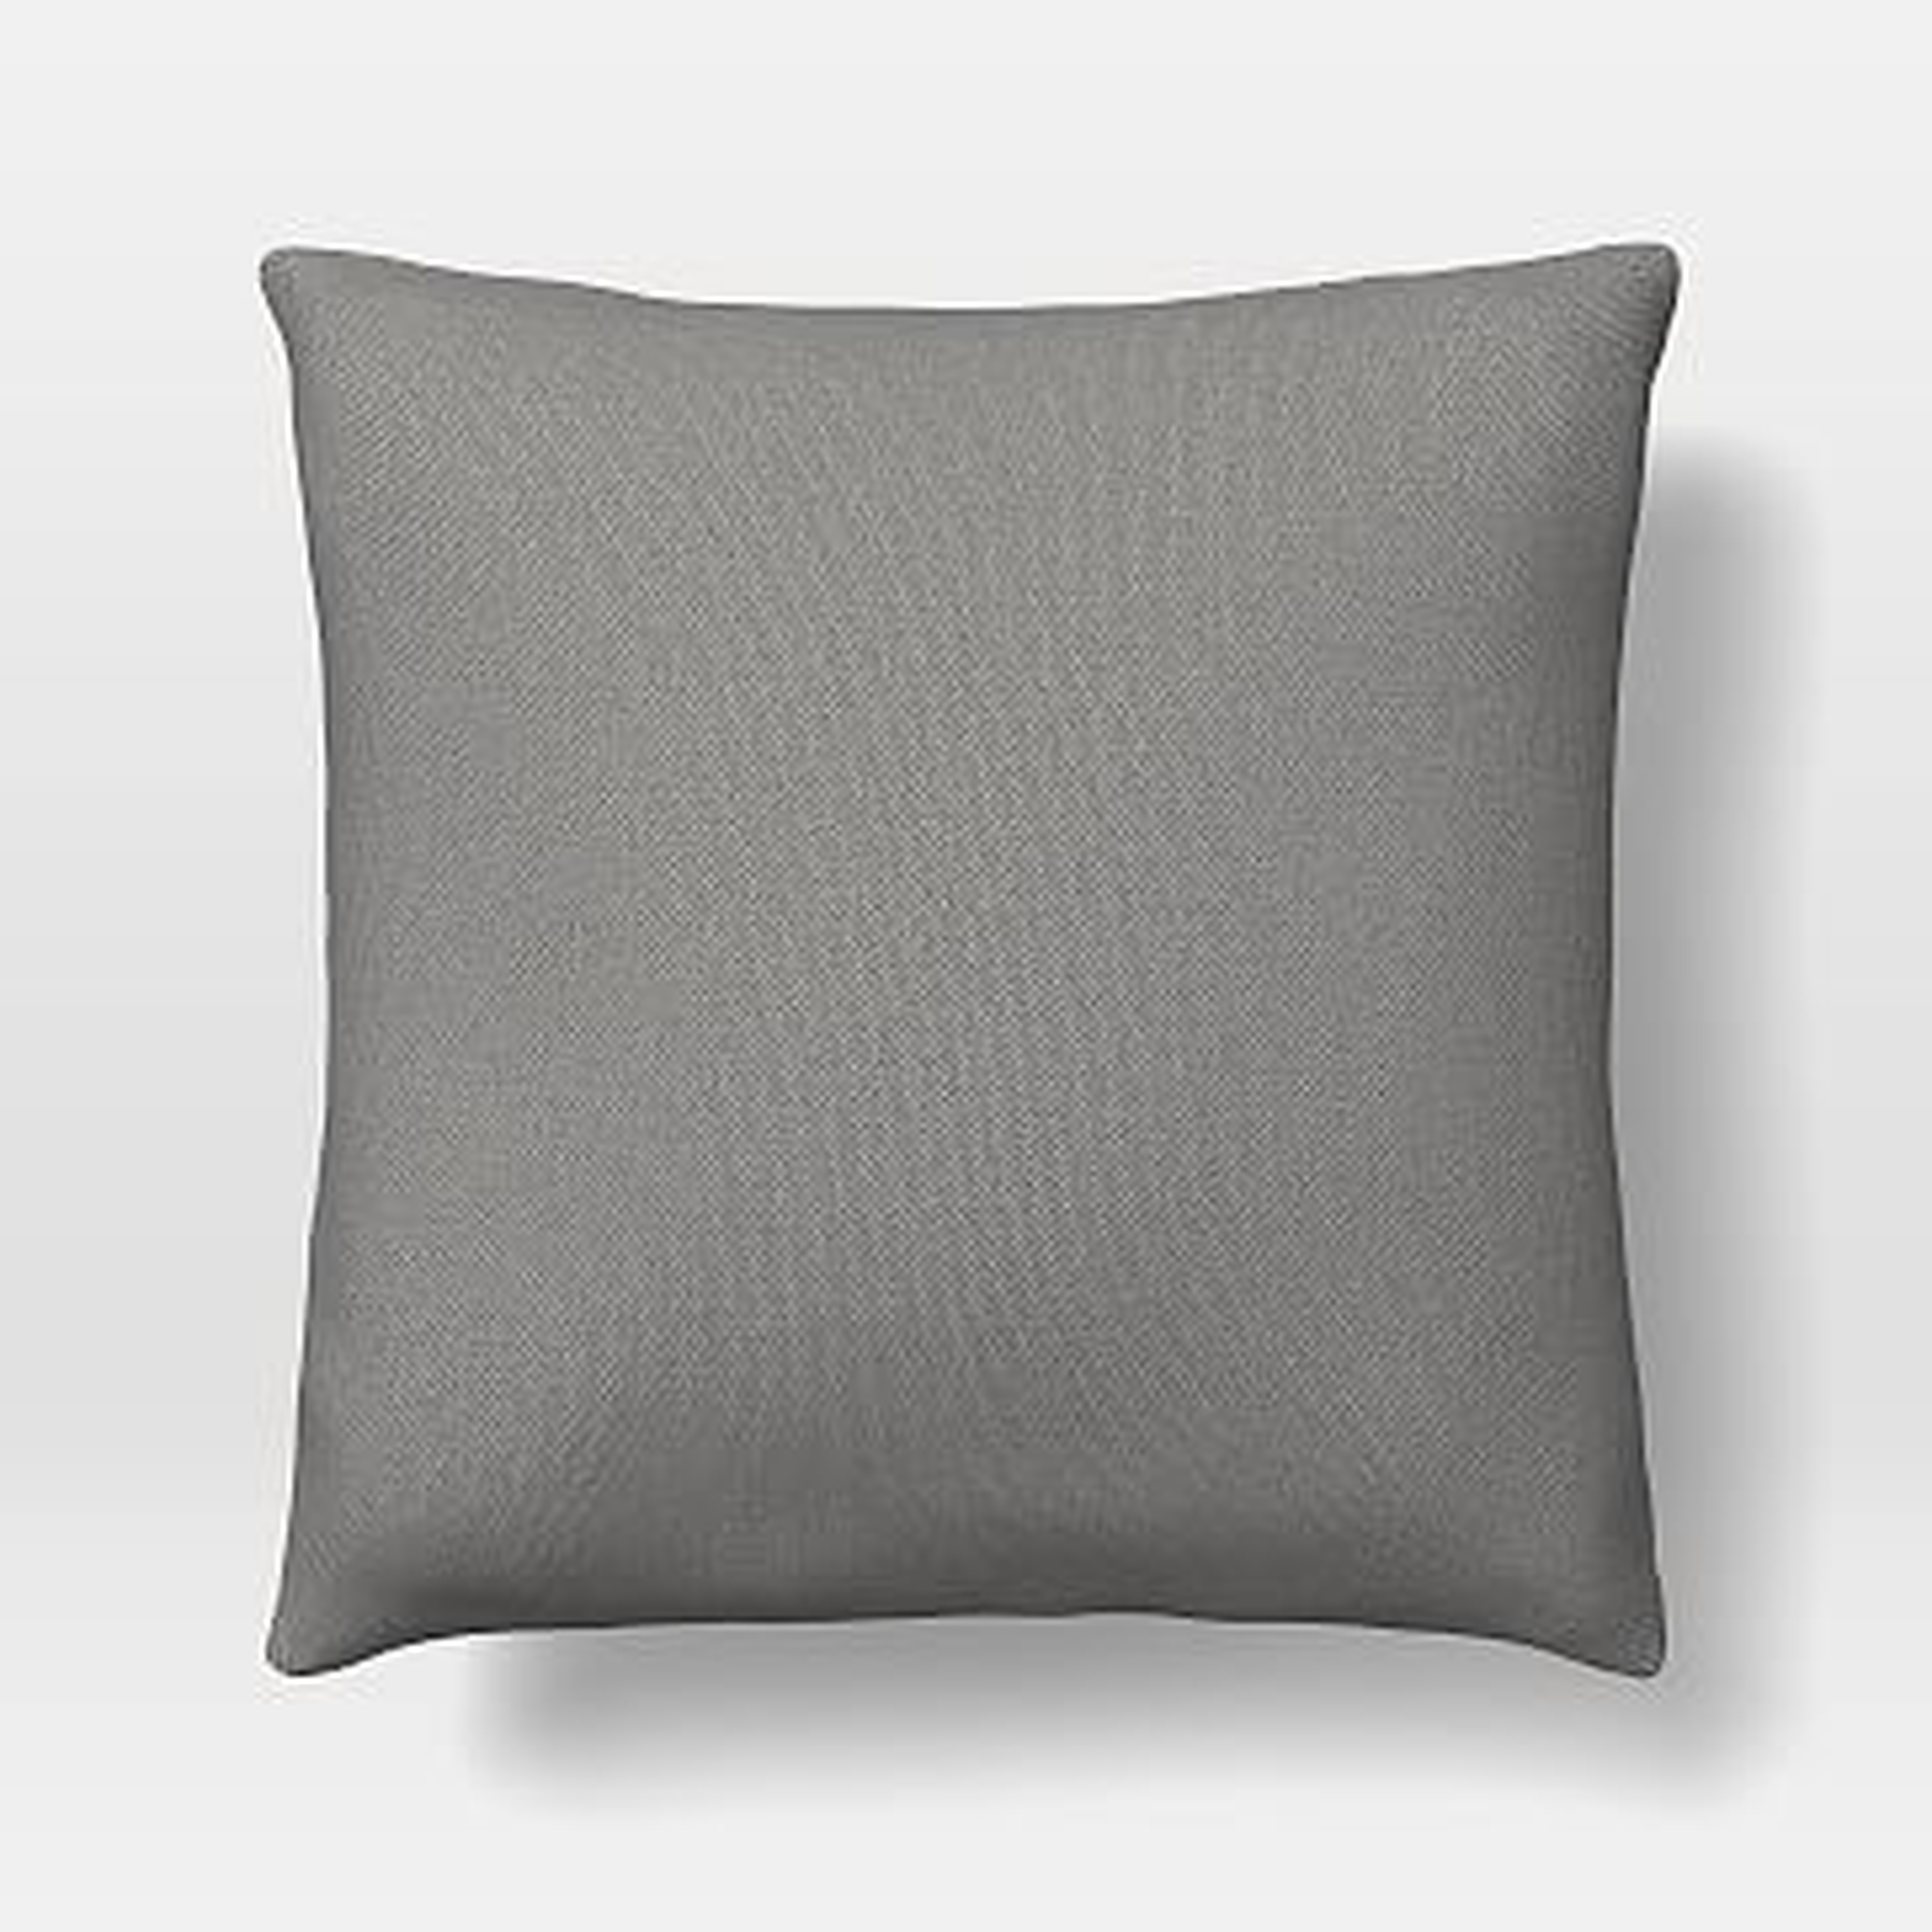 18"x 18" Pillow, N/A, Performance Washed Canvas, Storm Gray, N/A - West Elm